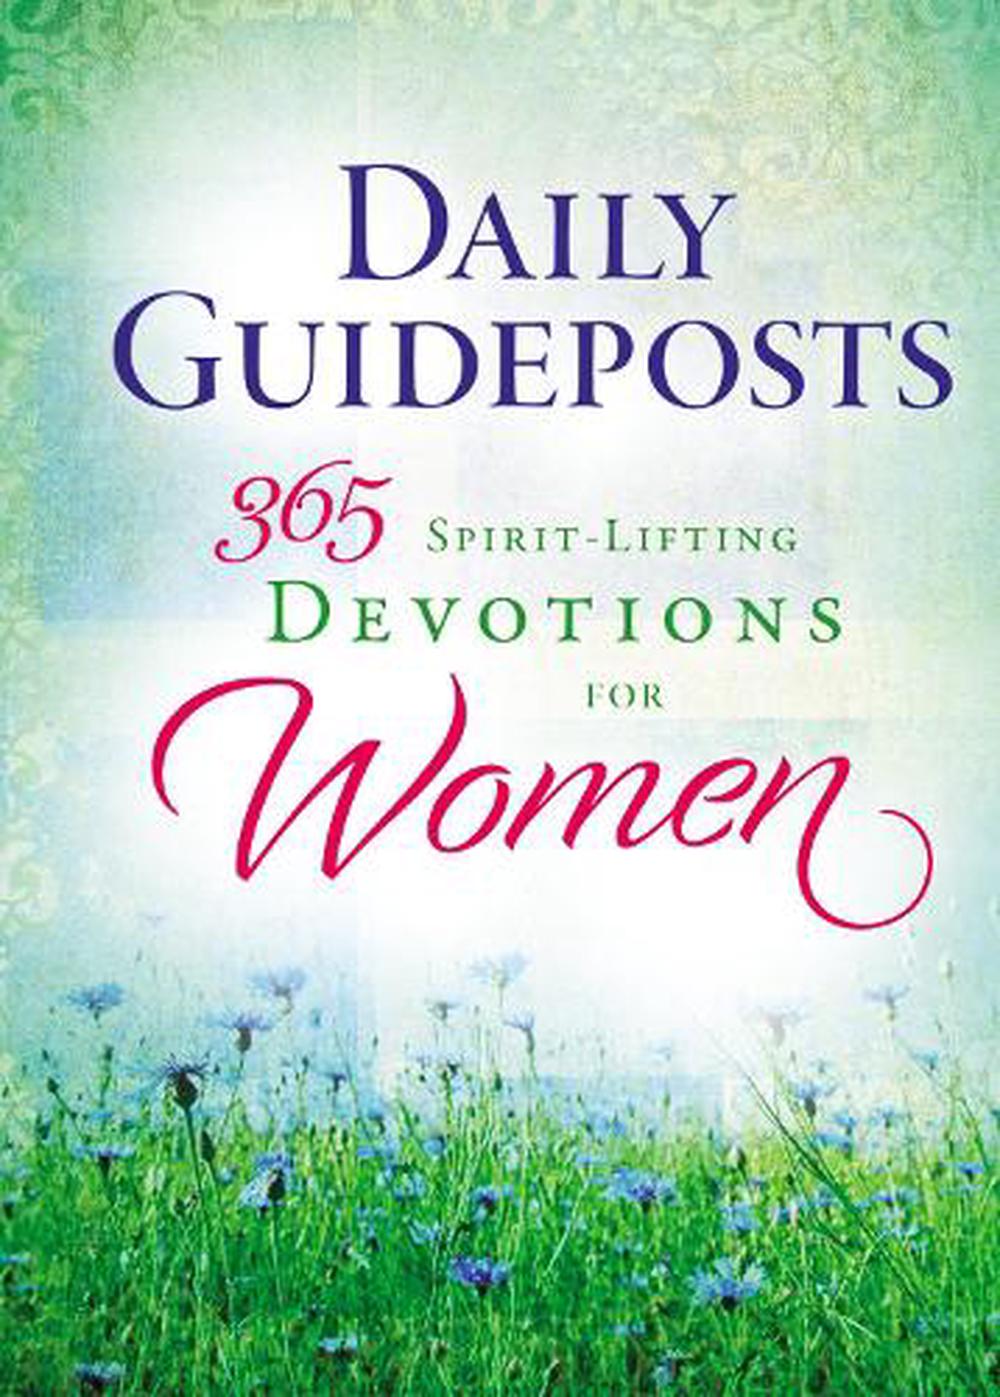 Daily Guideposts 365 Spiritlifting Devotions for Women by Guideposts (English) 9780310357346 eBay